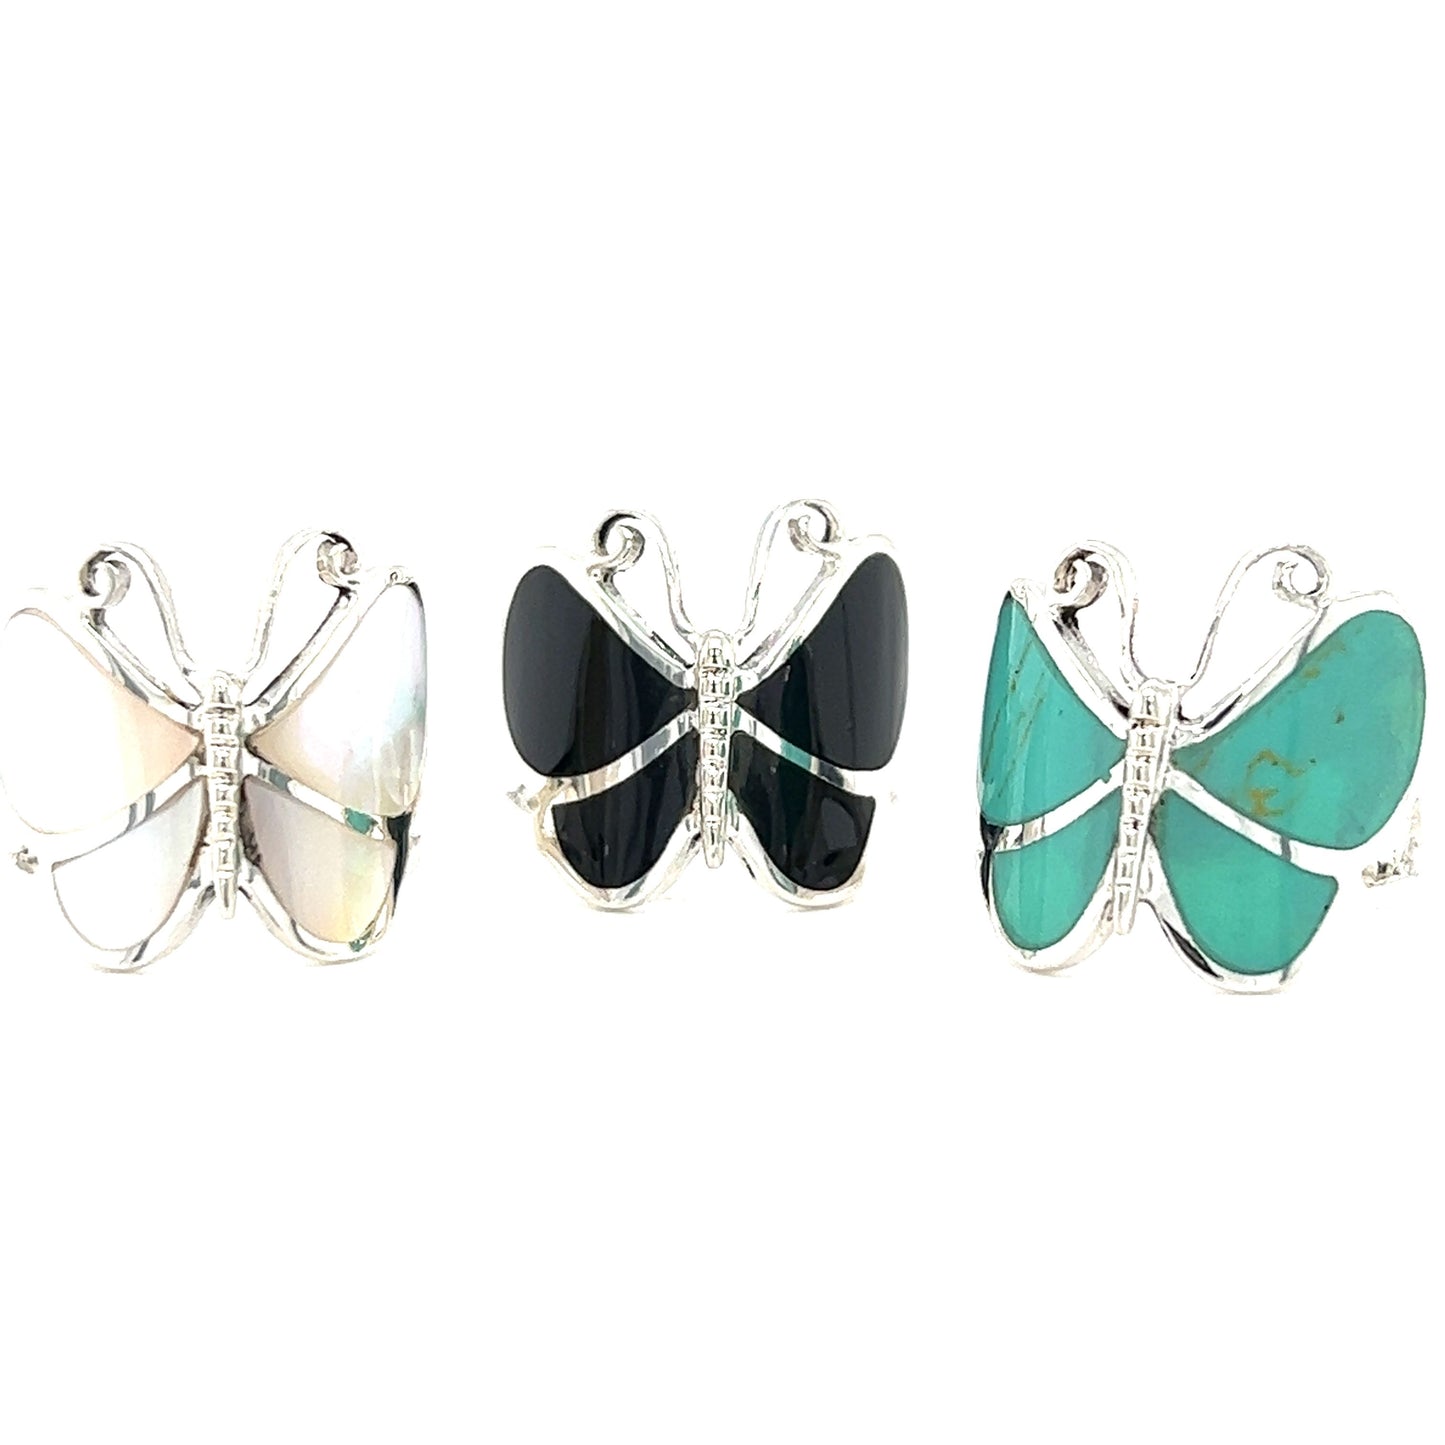 Three statement Bold Butterfly Ring with Inlaid Stones.